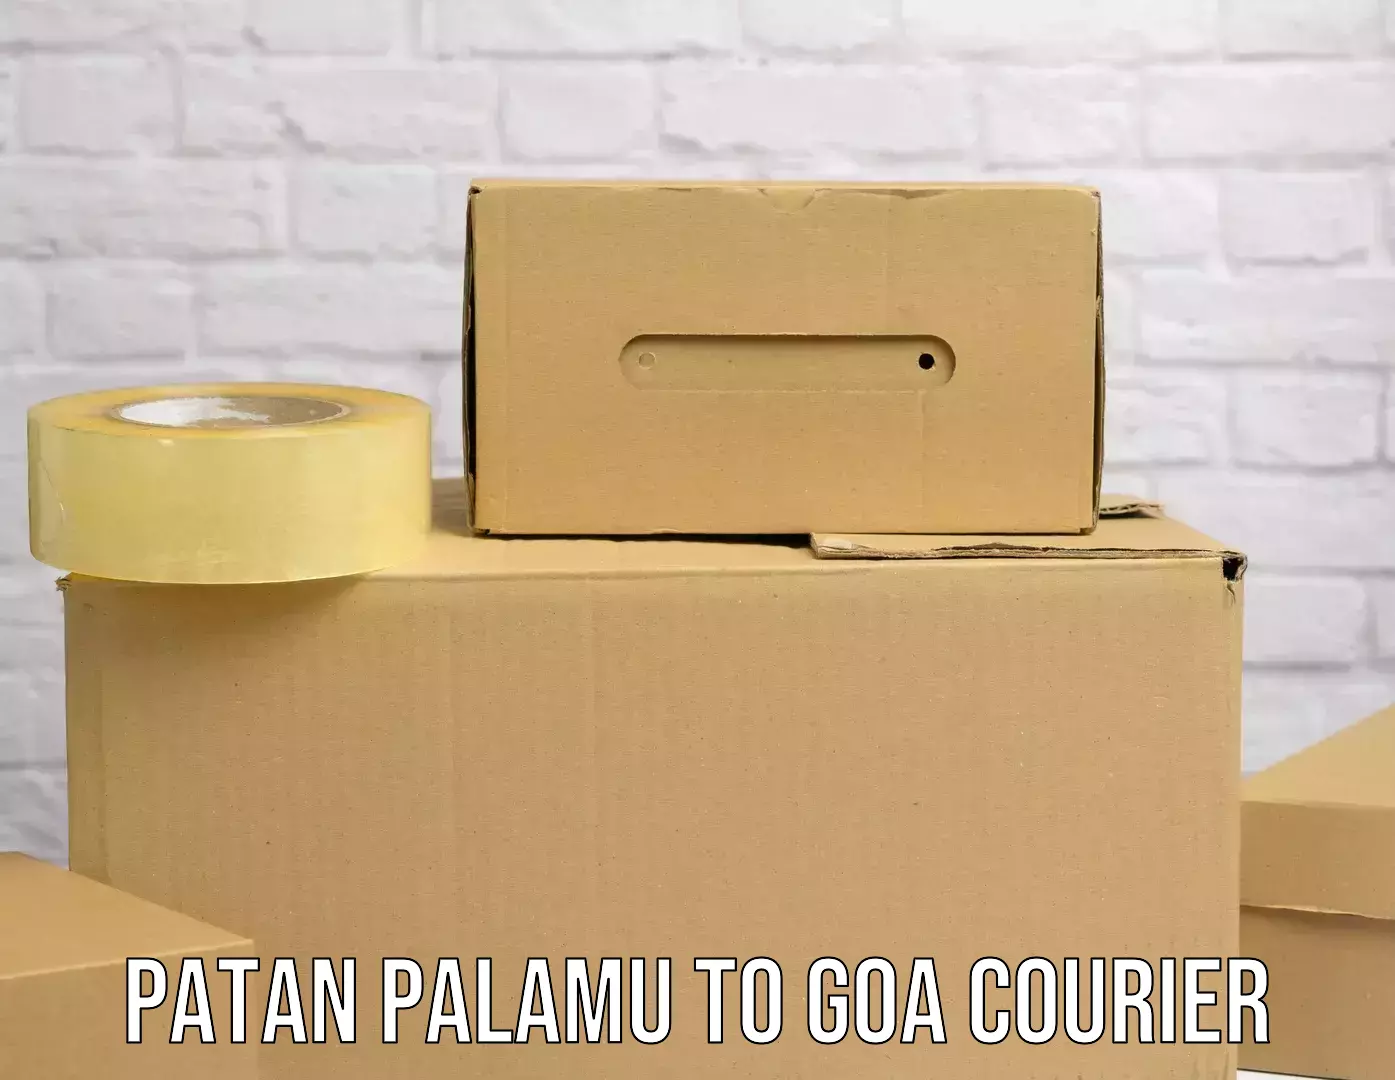 Reliable delivery network Patan Palamu to Goa